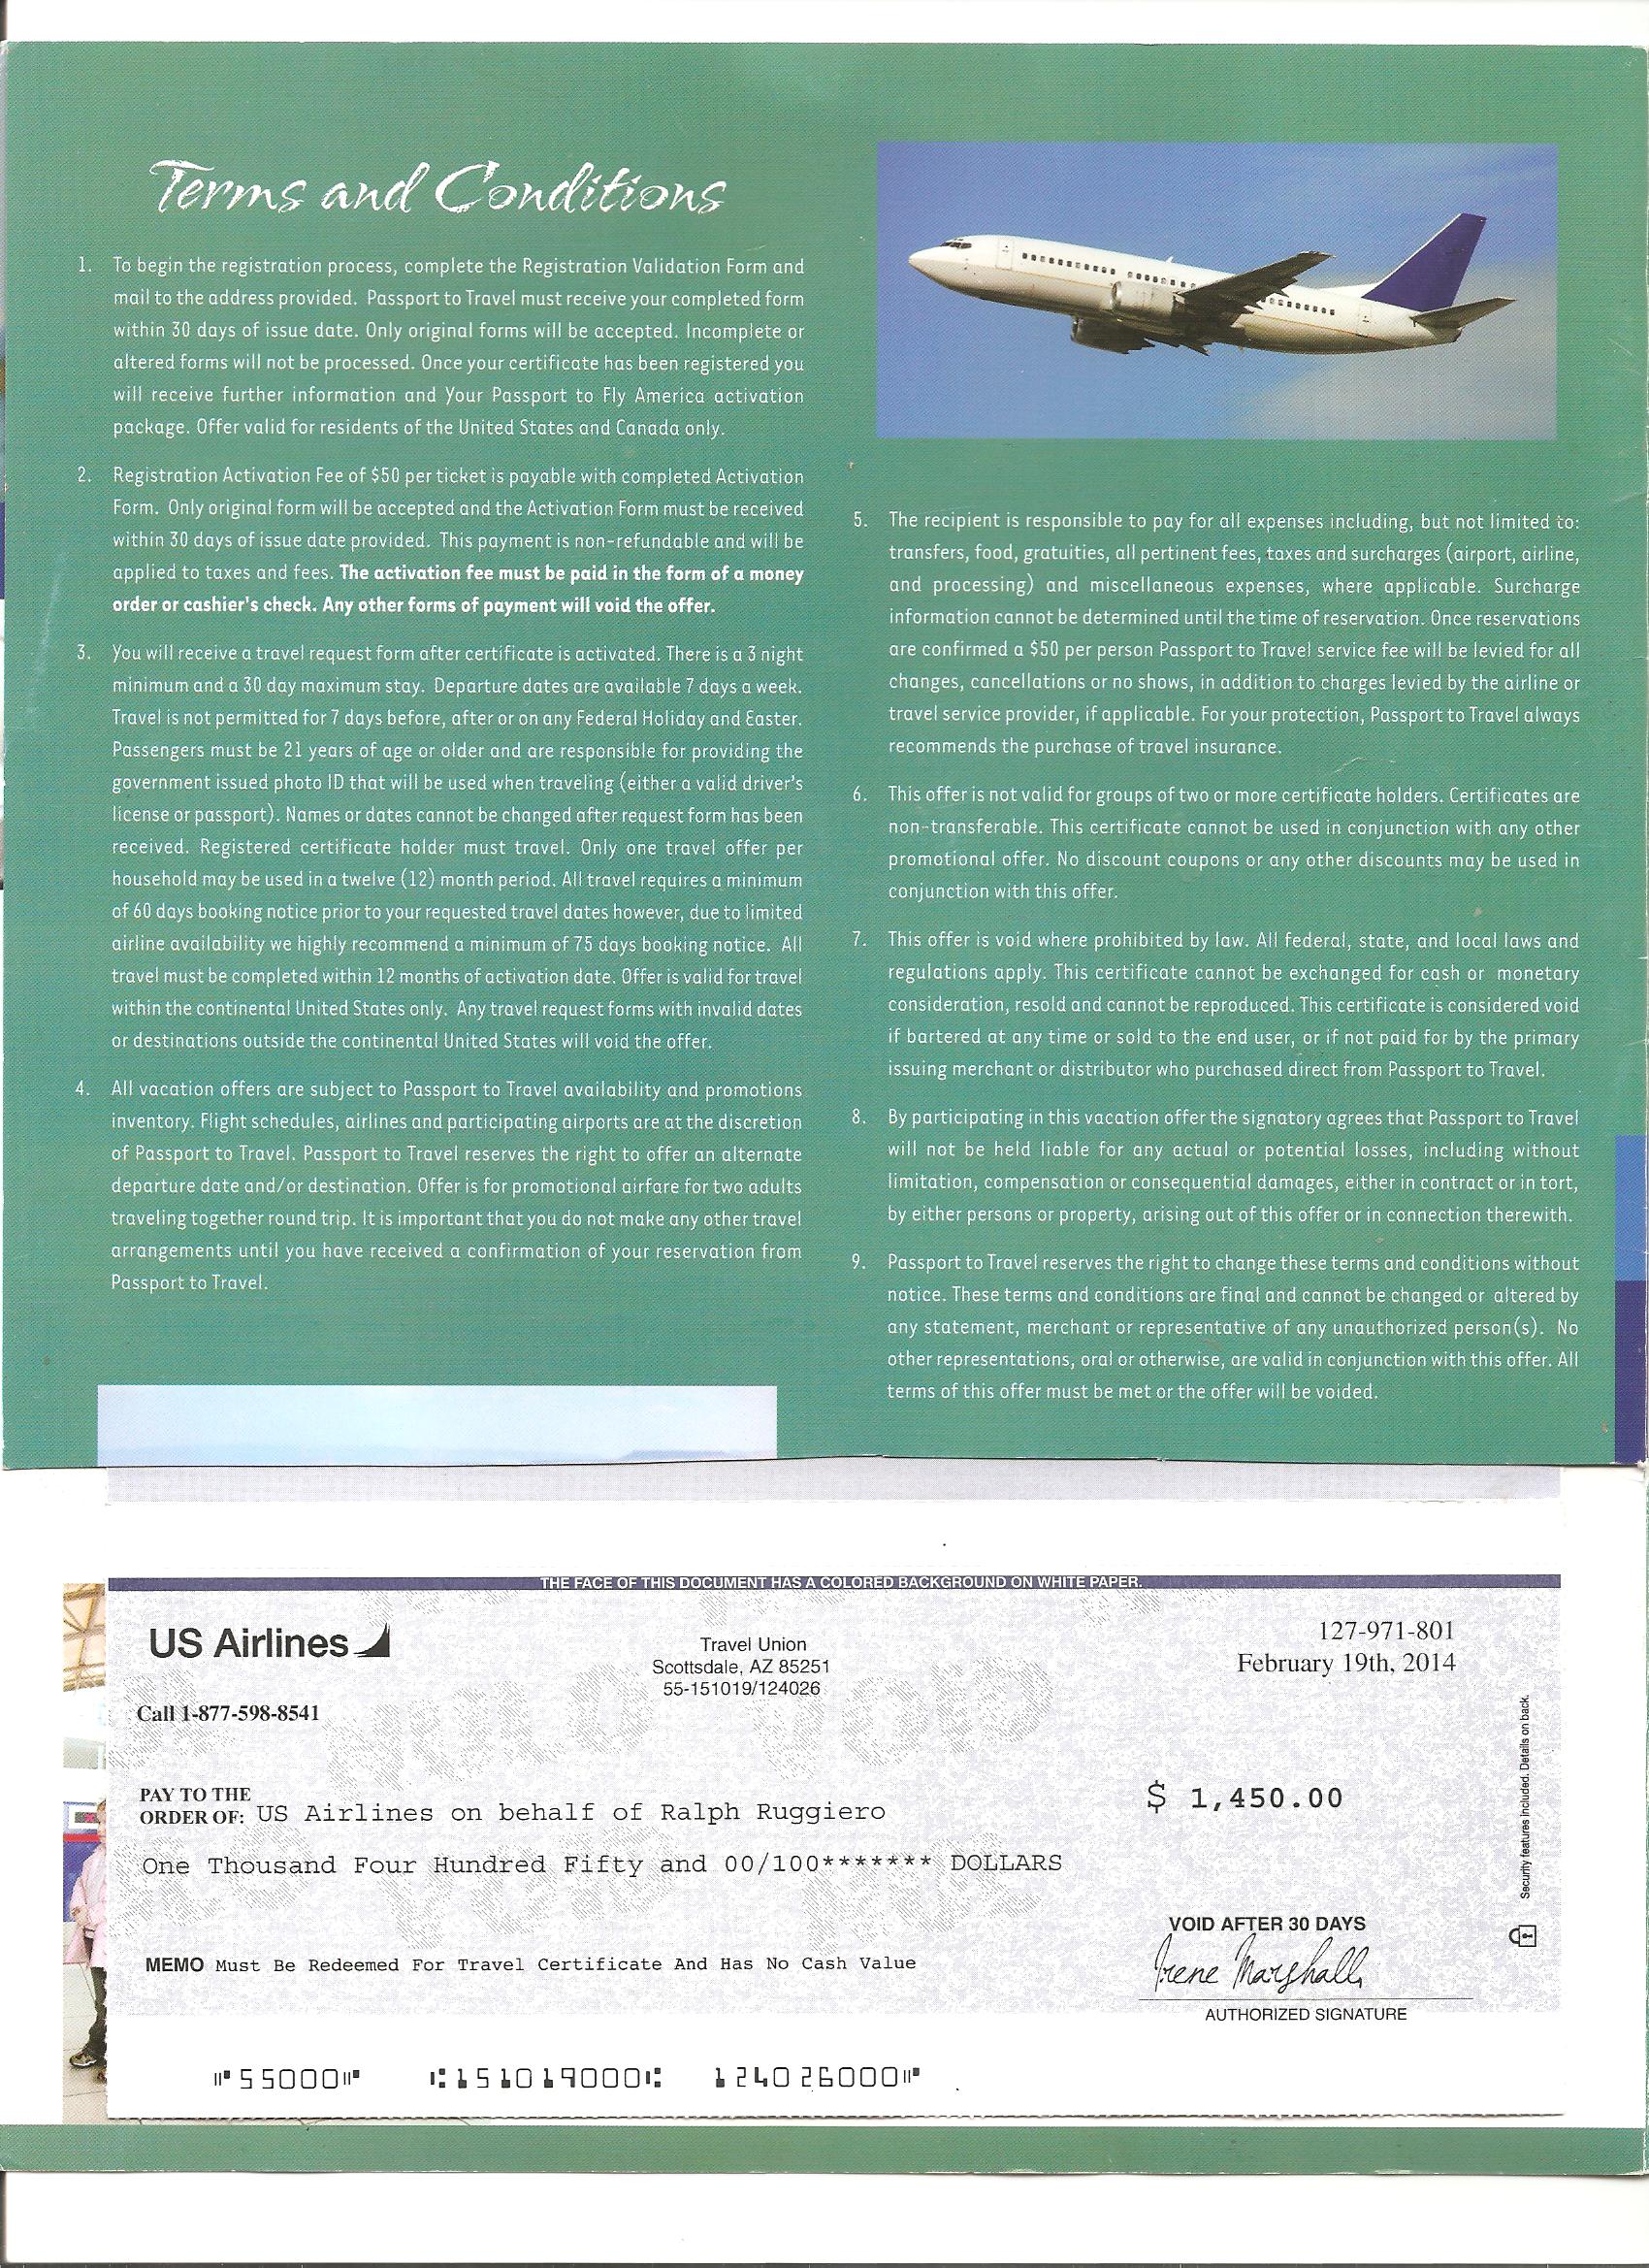 The Brochure "small print" with a copy of the Global Travel Invitation on the bottom